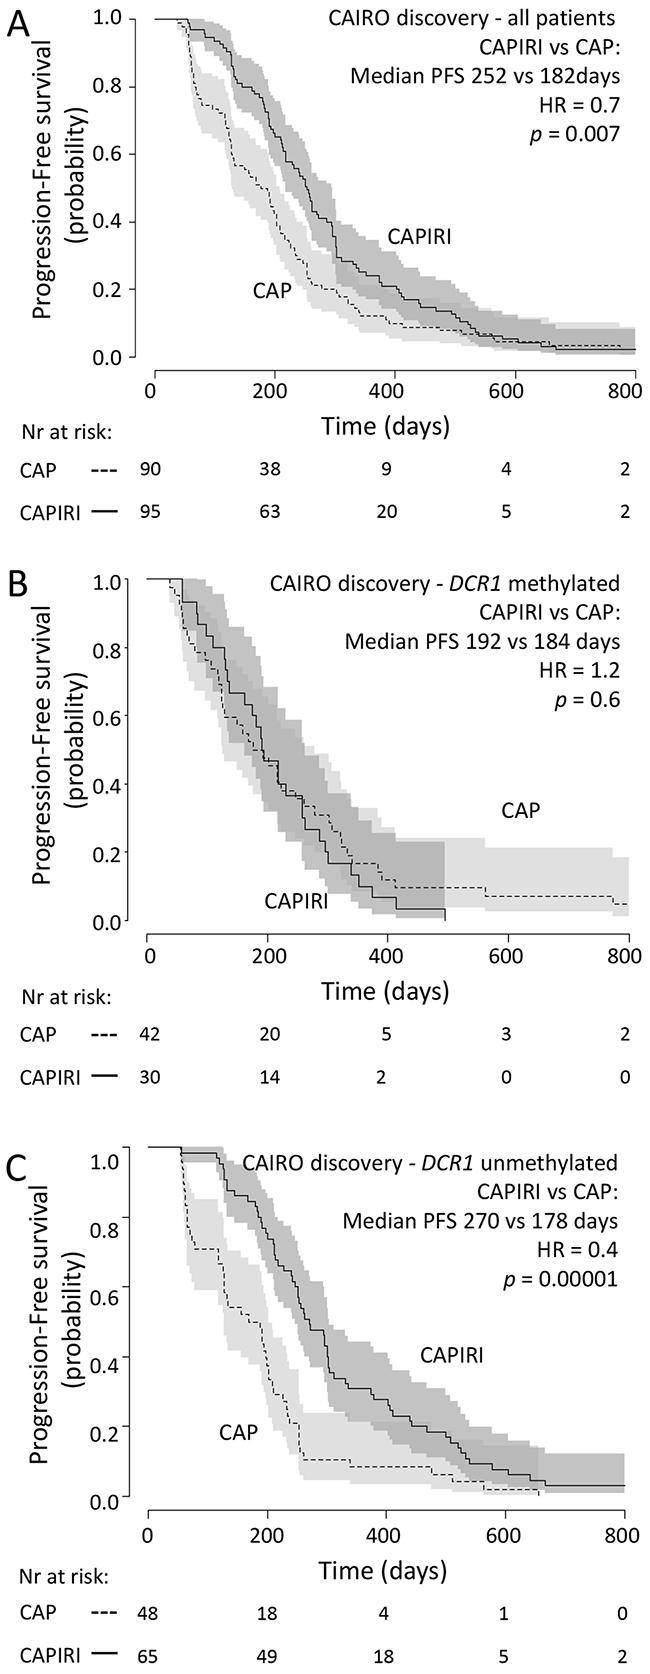 CAIRO discovery set: Progression-free survival Progression free survival in metastatic CRC cancer patients treated in first-line with CAP (dashed line) or CAPIRI (solid line)in (A) all patients from the CAIRO discovery set, in (B) patientswith methylated tumor DCR1or in (C) patients with unmethylated tumor DCR1.